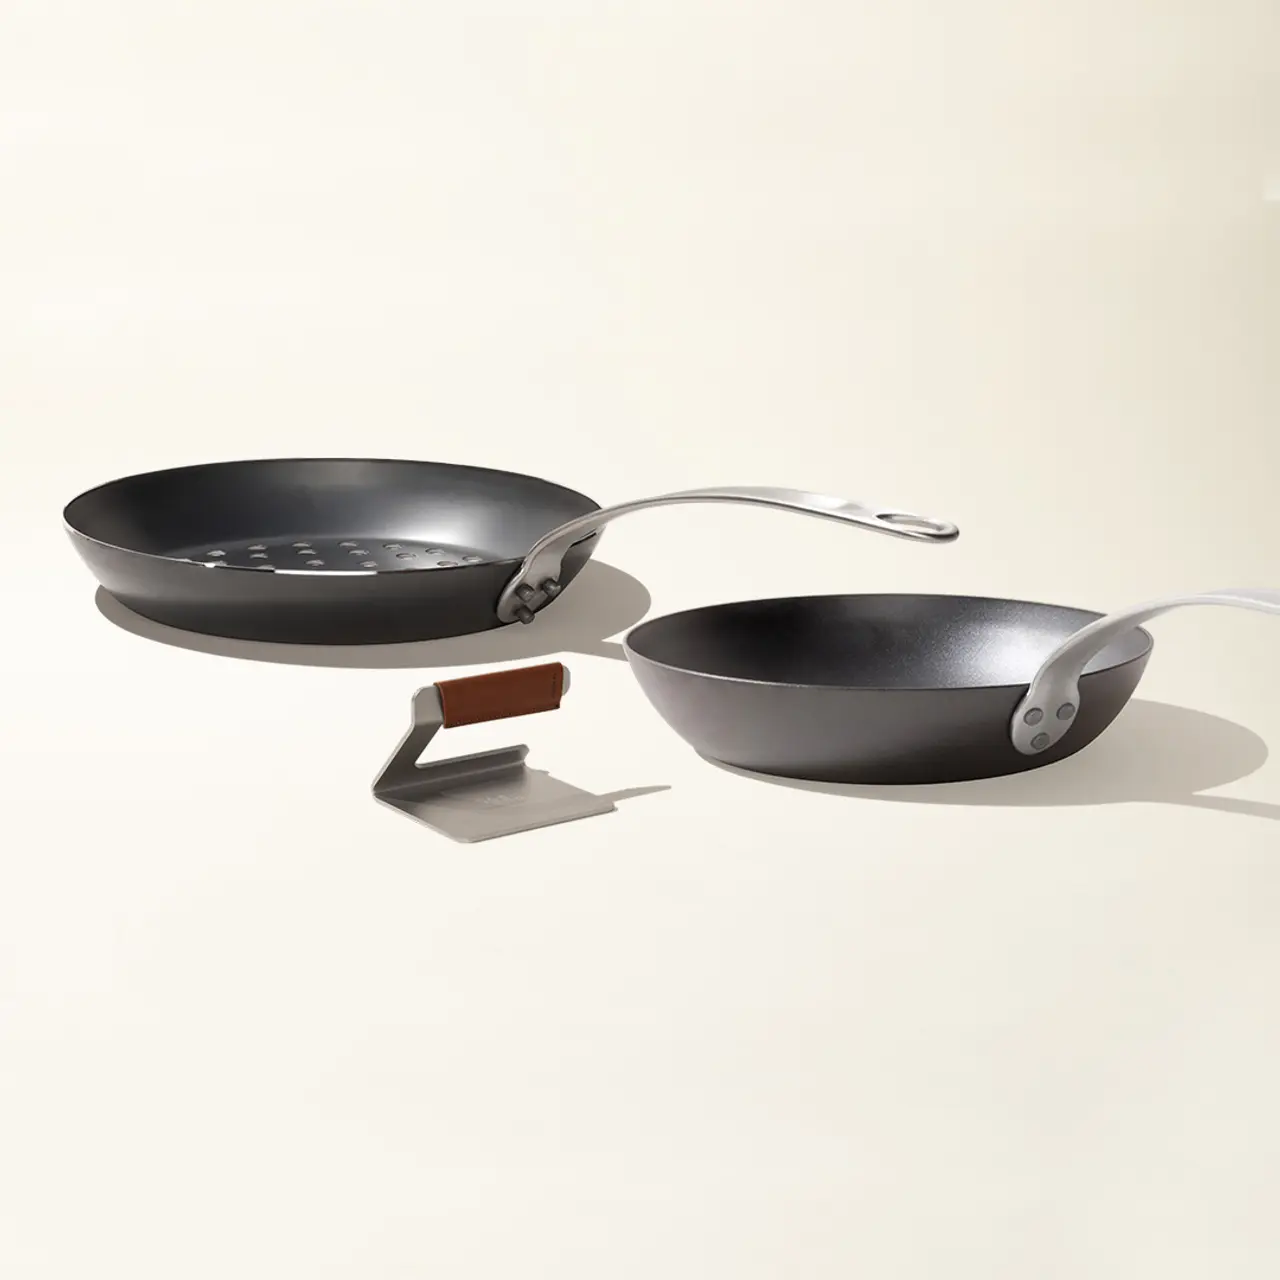 Two frying pans are balanced on a brown rectangular object, casting soft shadows on a light surface.